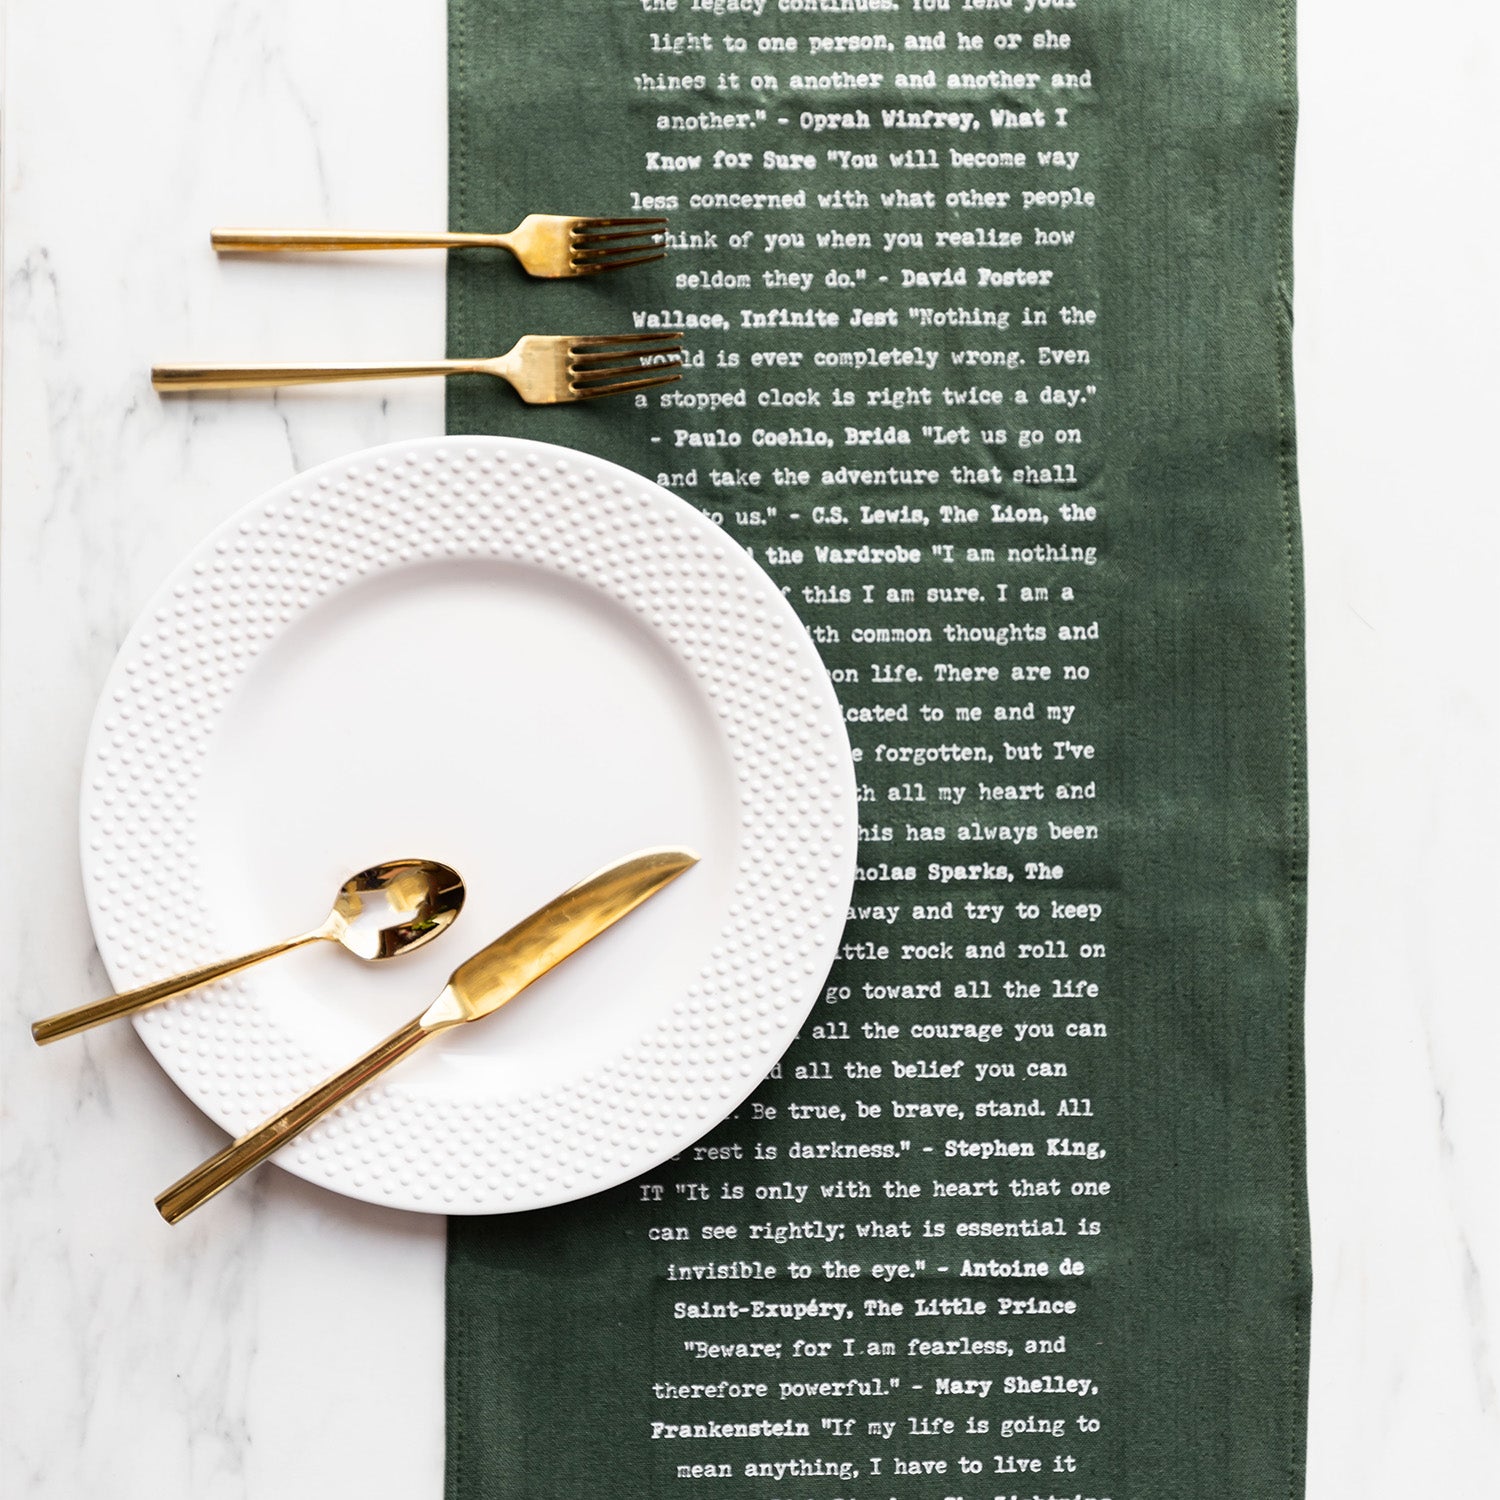 A white marble table. A dark green table runner stretches down the middle of the image bearing inspiration quotes from celebrities and writers. A white dinner plate with a gold spoon and knife sits overlapping the table runner.